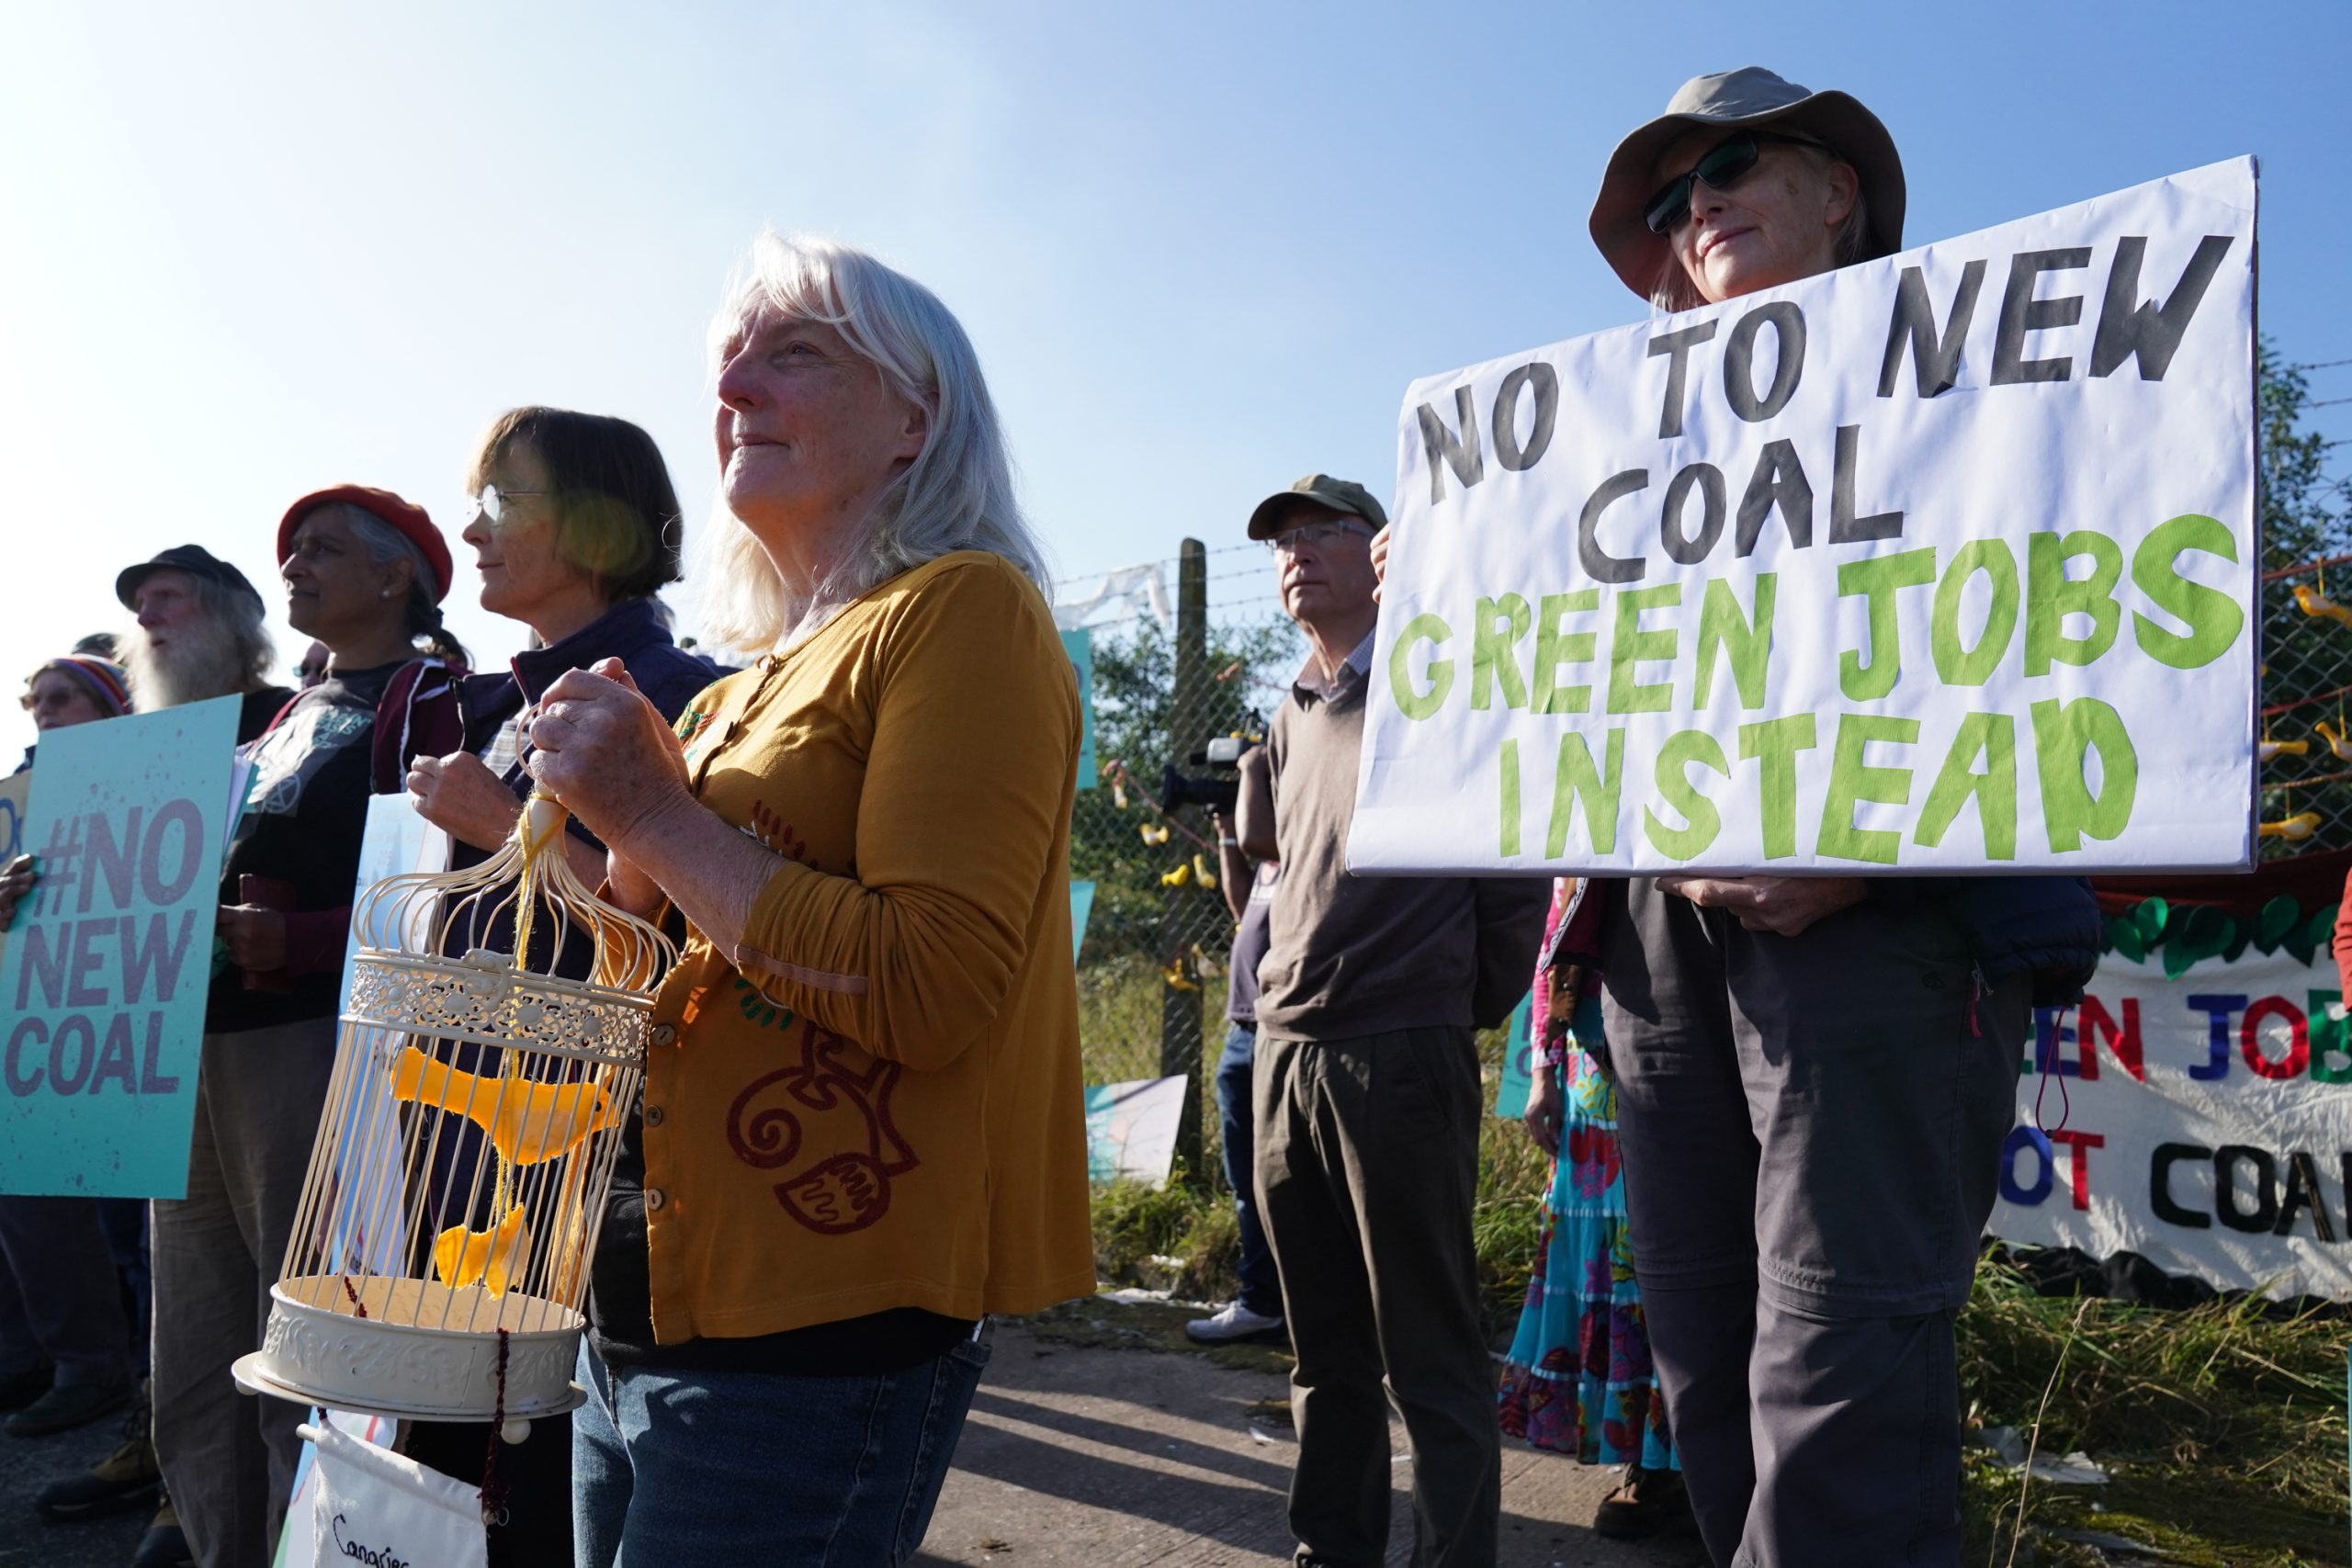 New coal mine would be ‘monumental mistake’ that ‘epitomises climate hypocrisy’